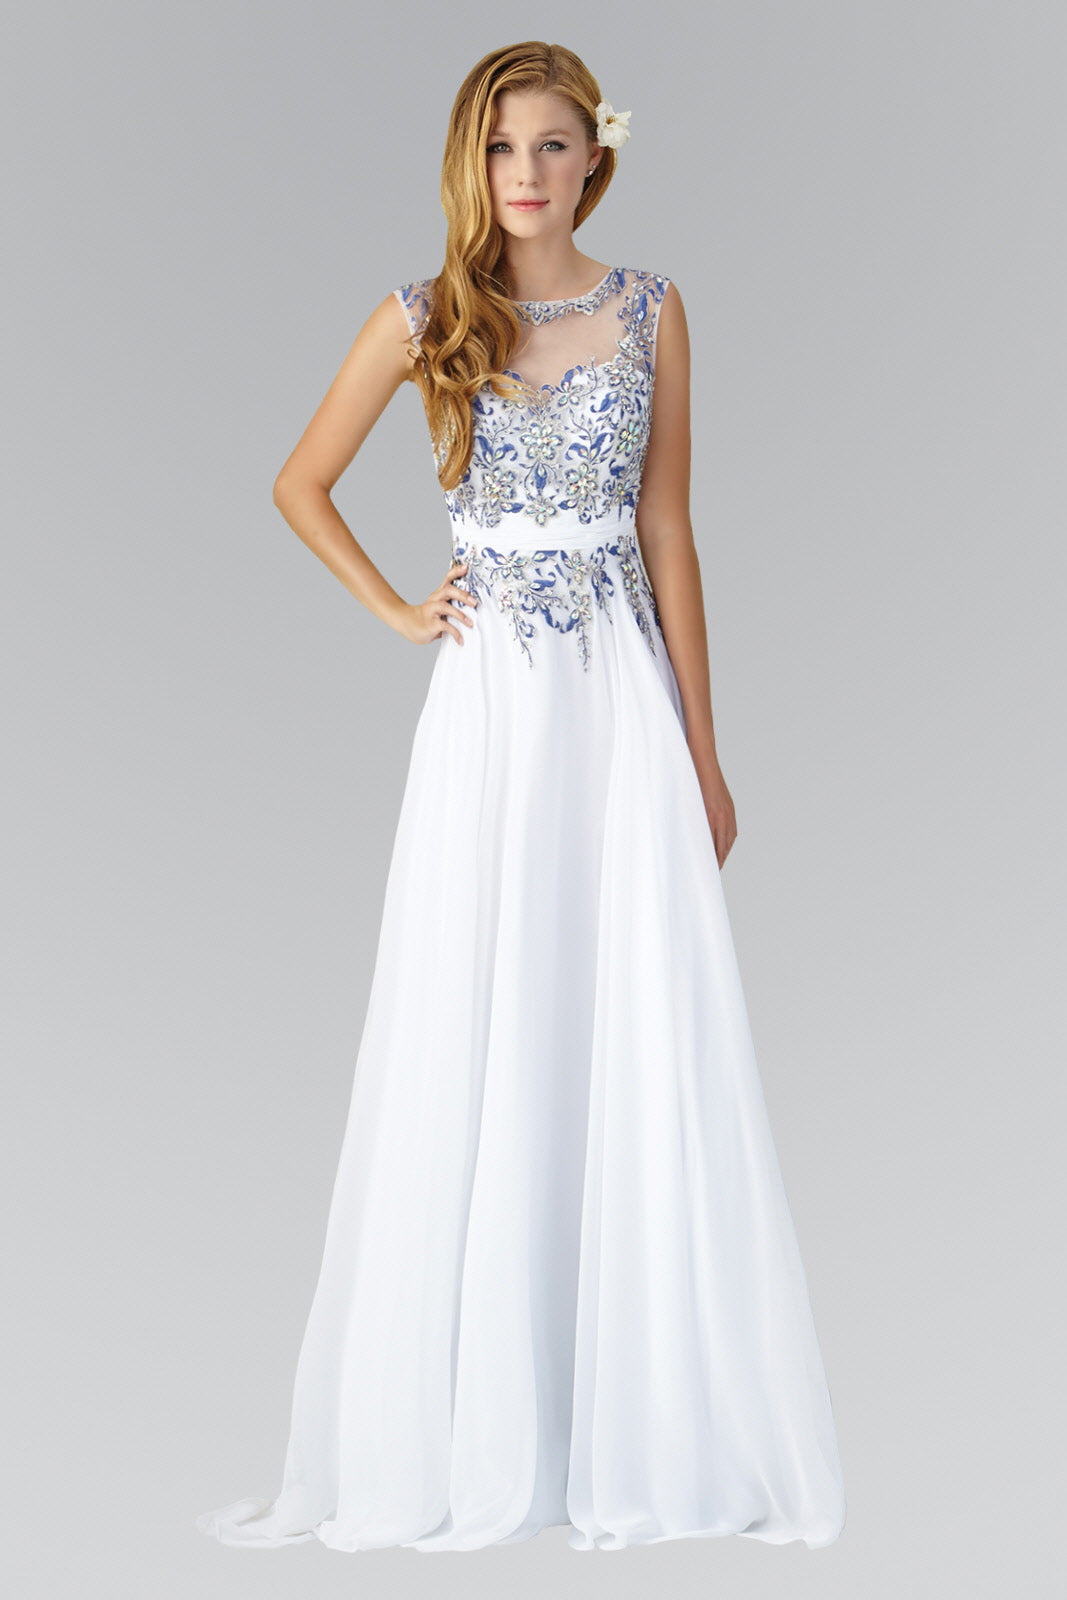 Long Dress with Lace and Jewel Embellished Bodice-smcdress